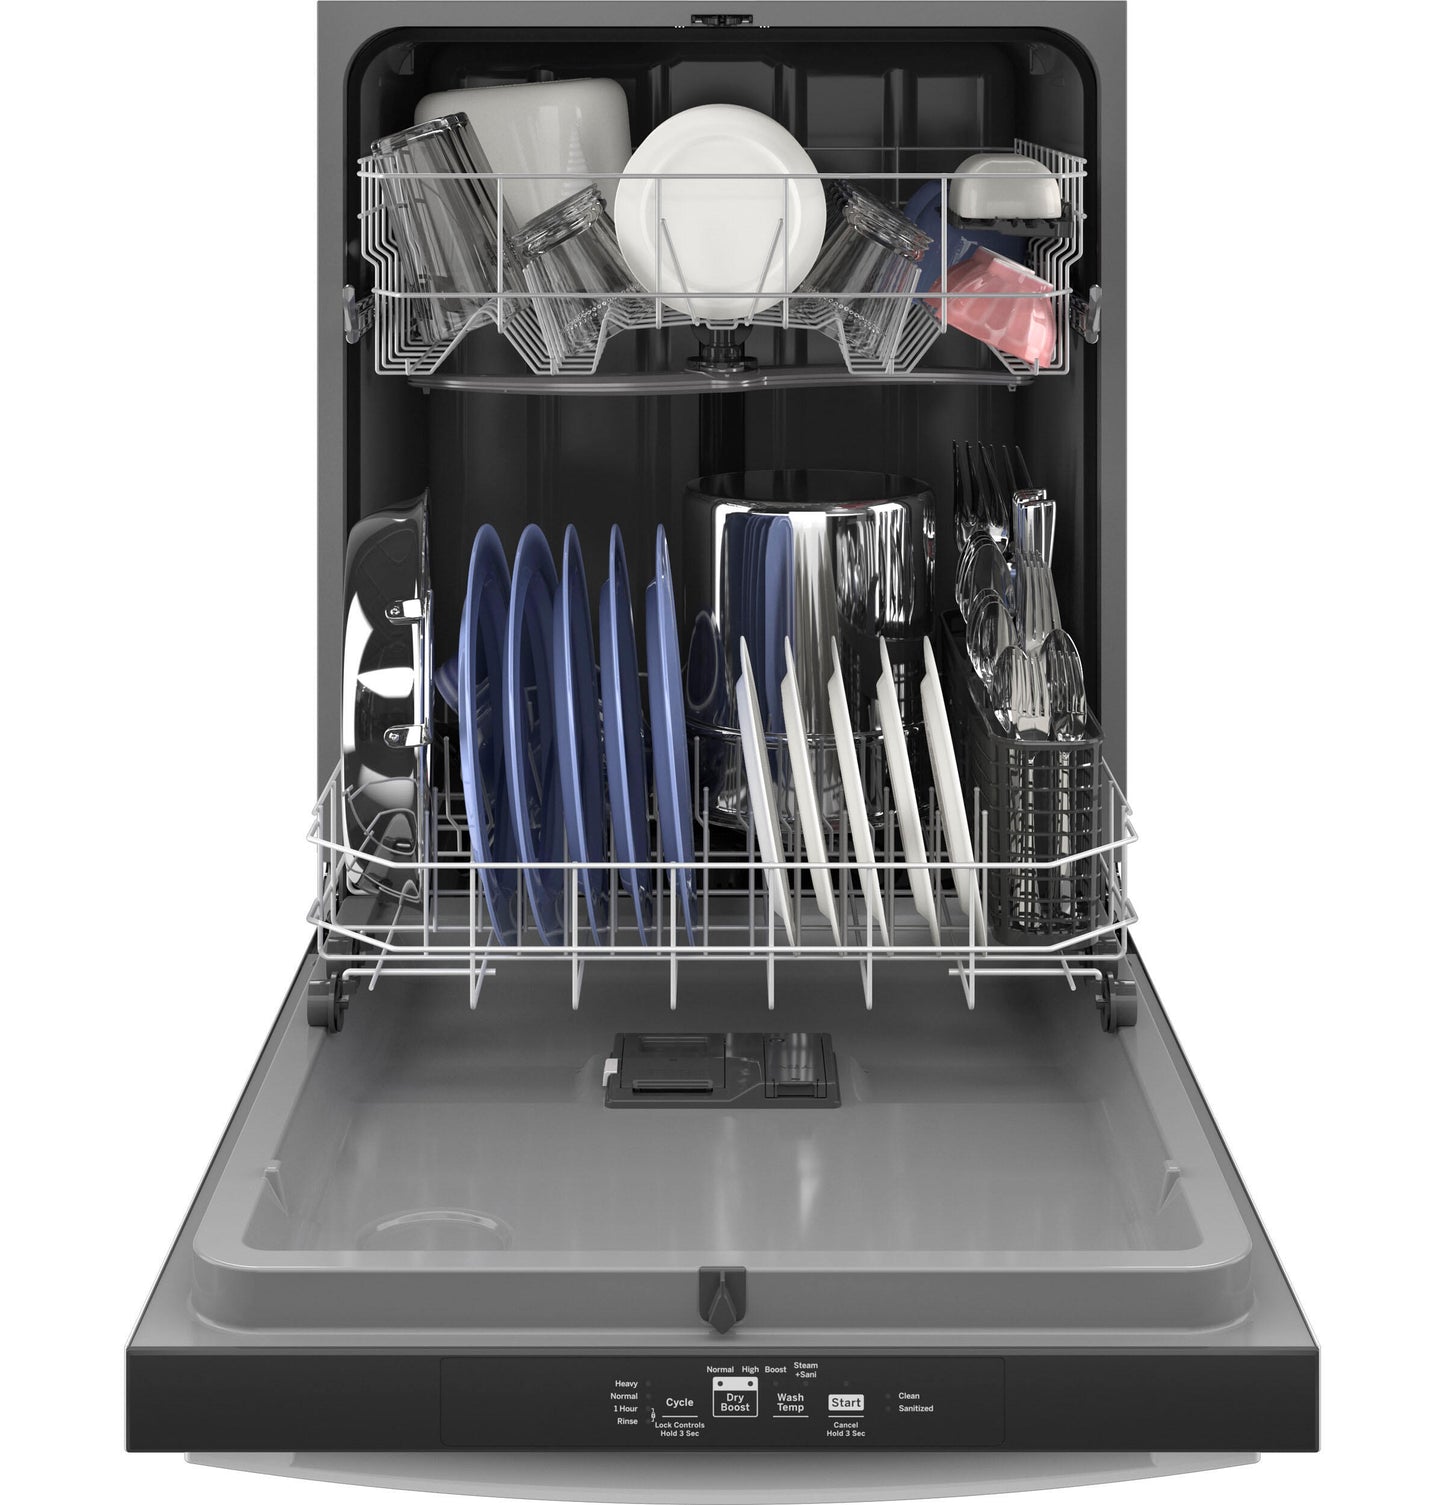 Ge Appliances GDT535PGRWW Ge® Top Control With Plastic Interior Dishwasher With Sanitize Cycle & Dry Boost